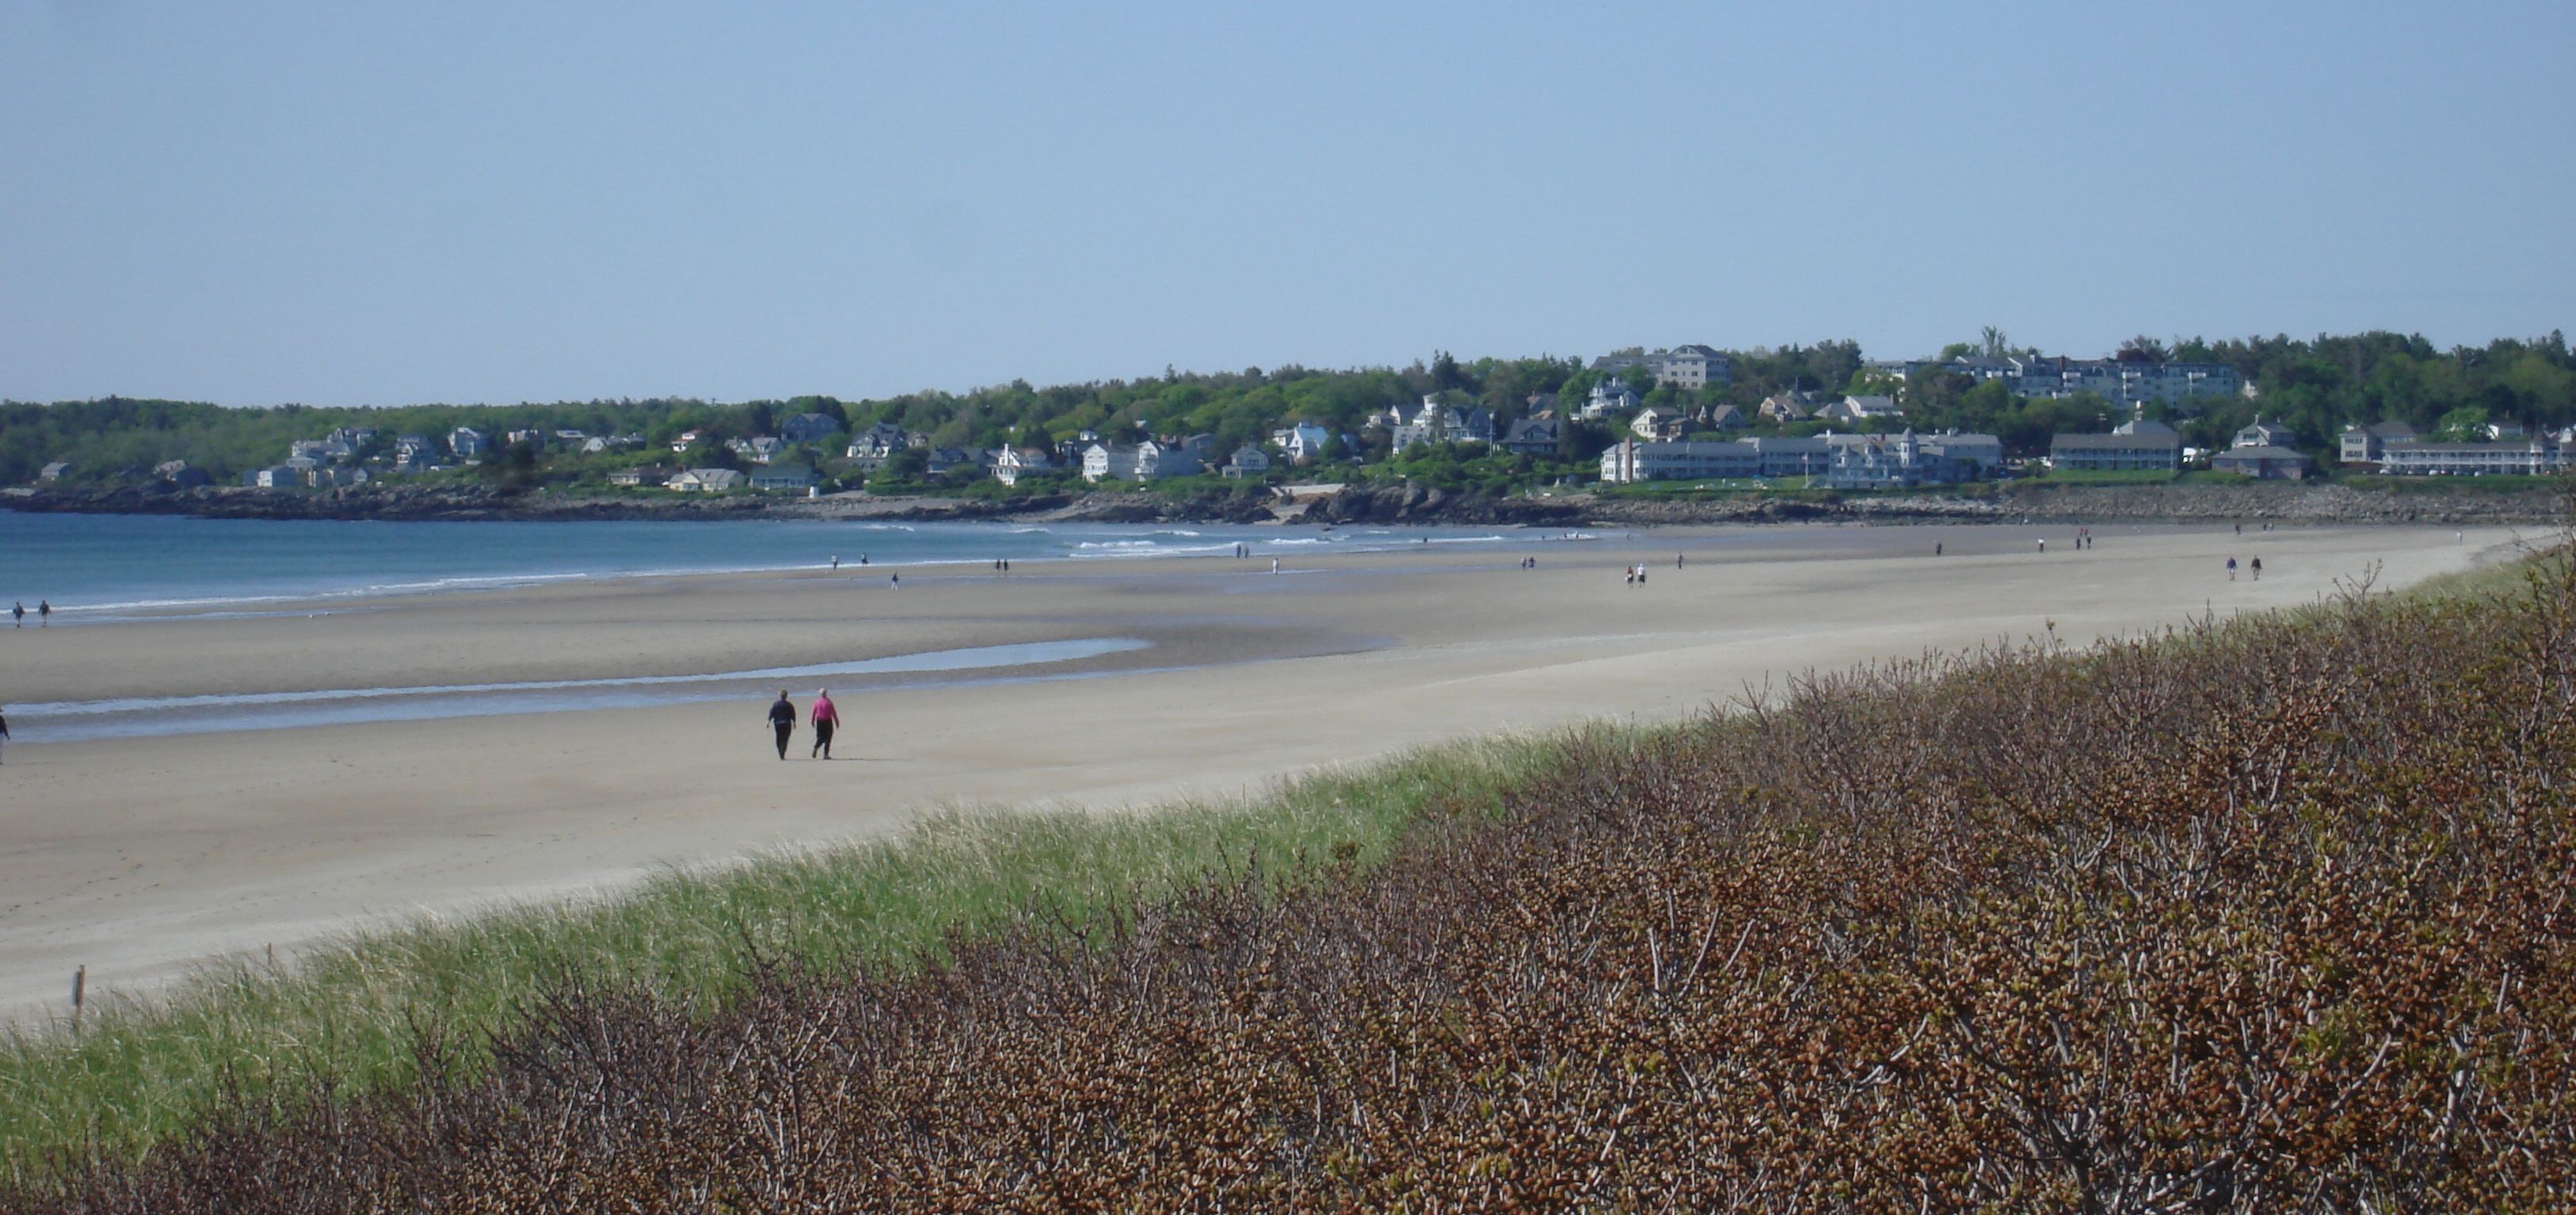 Rental Homes In The Towns Of Ogunquit Wells And York On The Coast